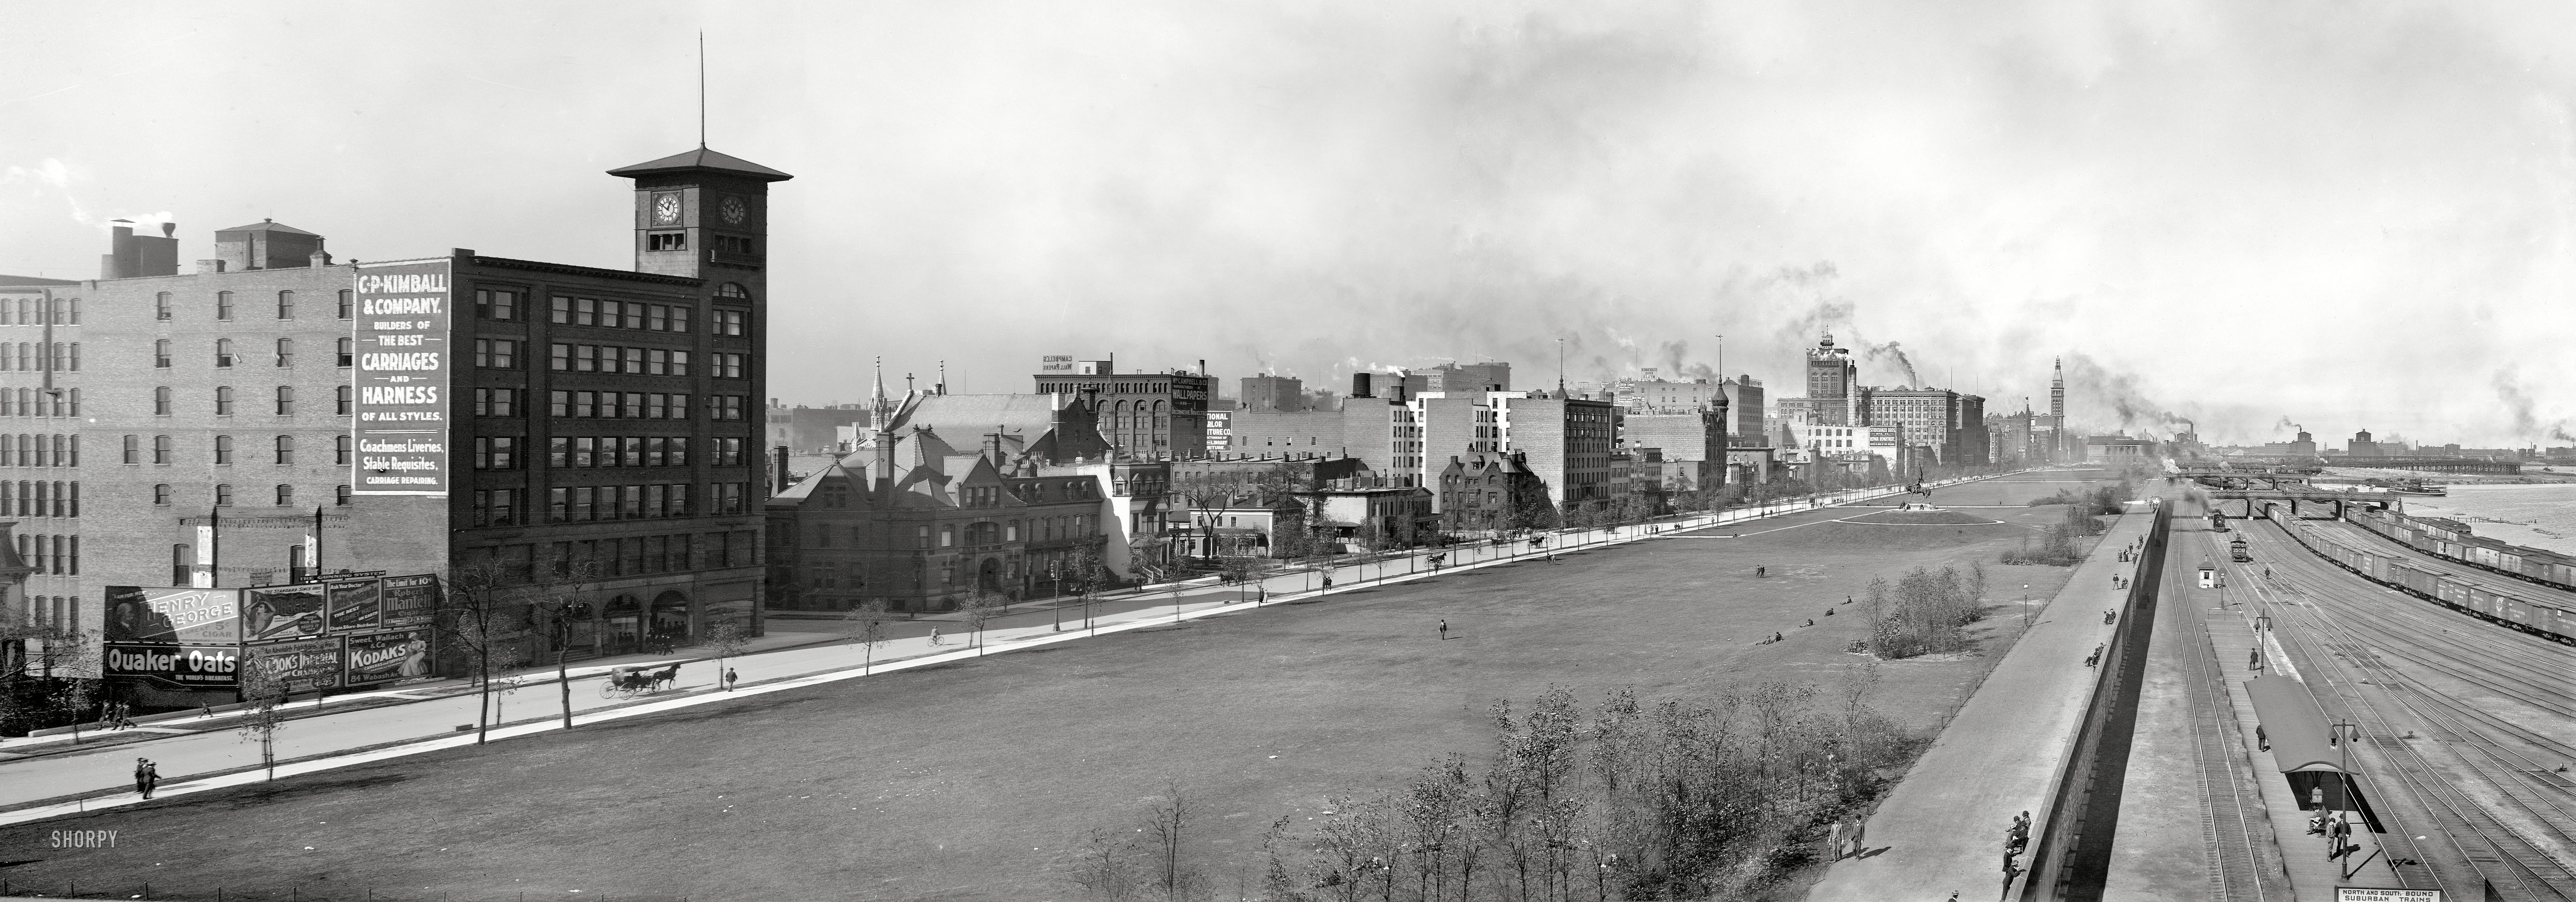 Chicago circa 1901. "The lakefront from Illinois Central Station." Panorama of two 8x10 glass negatives. Detroit Publishing Company. View full size.